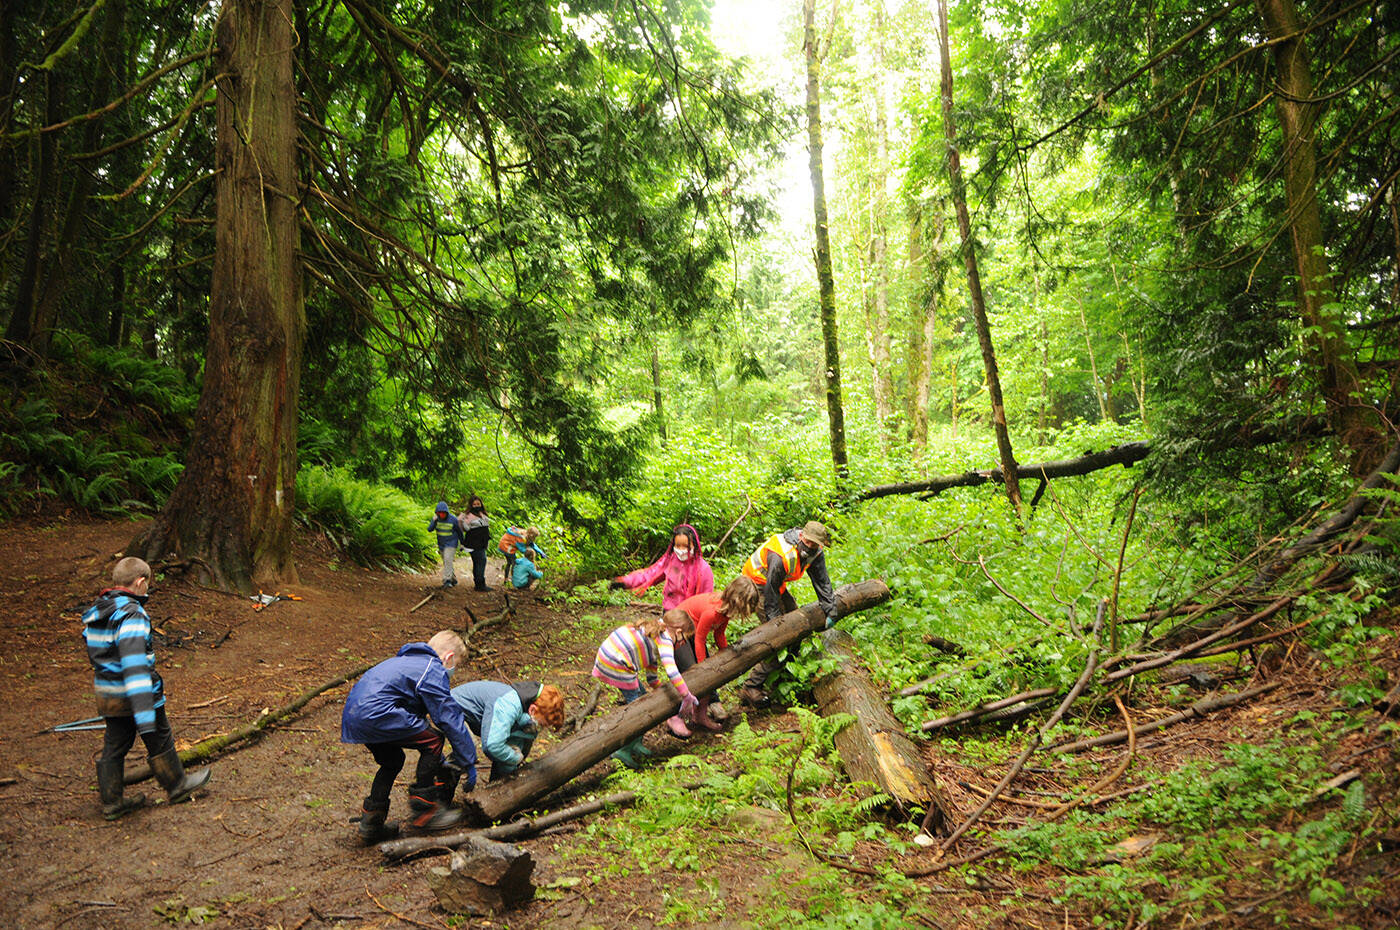 Grade 4 and 5 students from Little Mountain elementary move a log off to the side in a Chilliwack forest on Thursday, May 27, 2021. Monday, March 21, 2022 is International Day of Forests. (Jenna Hauck/ Chilliwack Progress file)